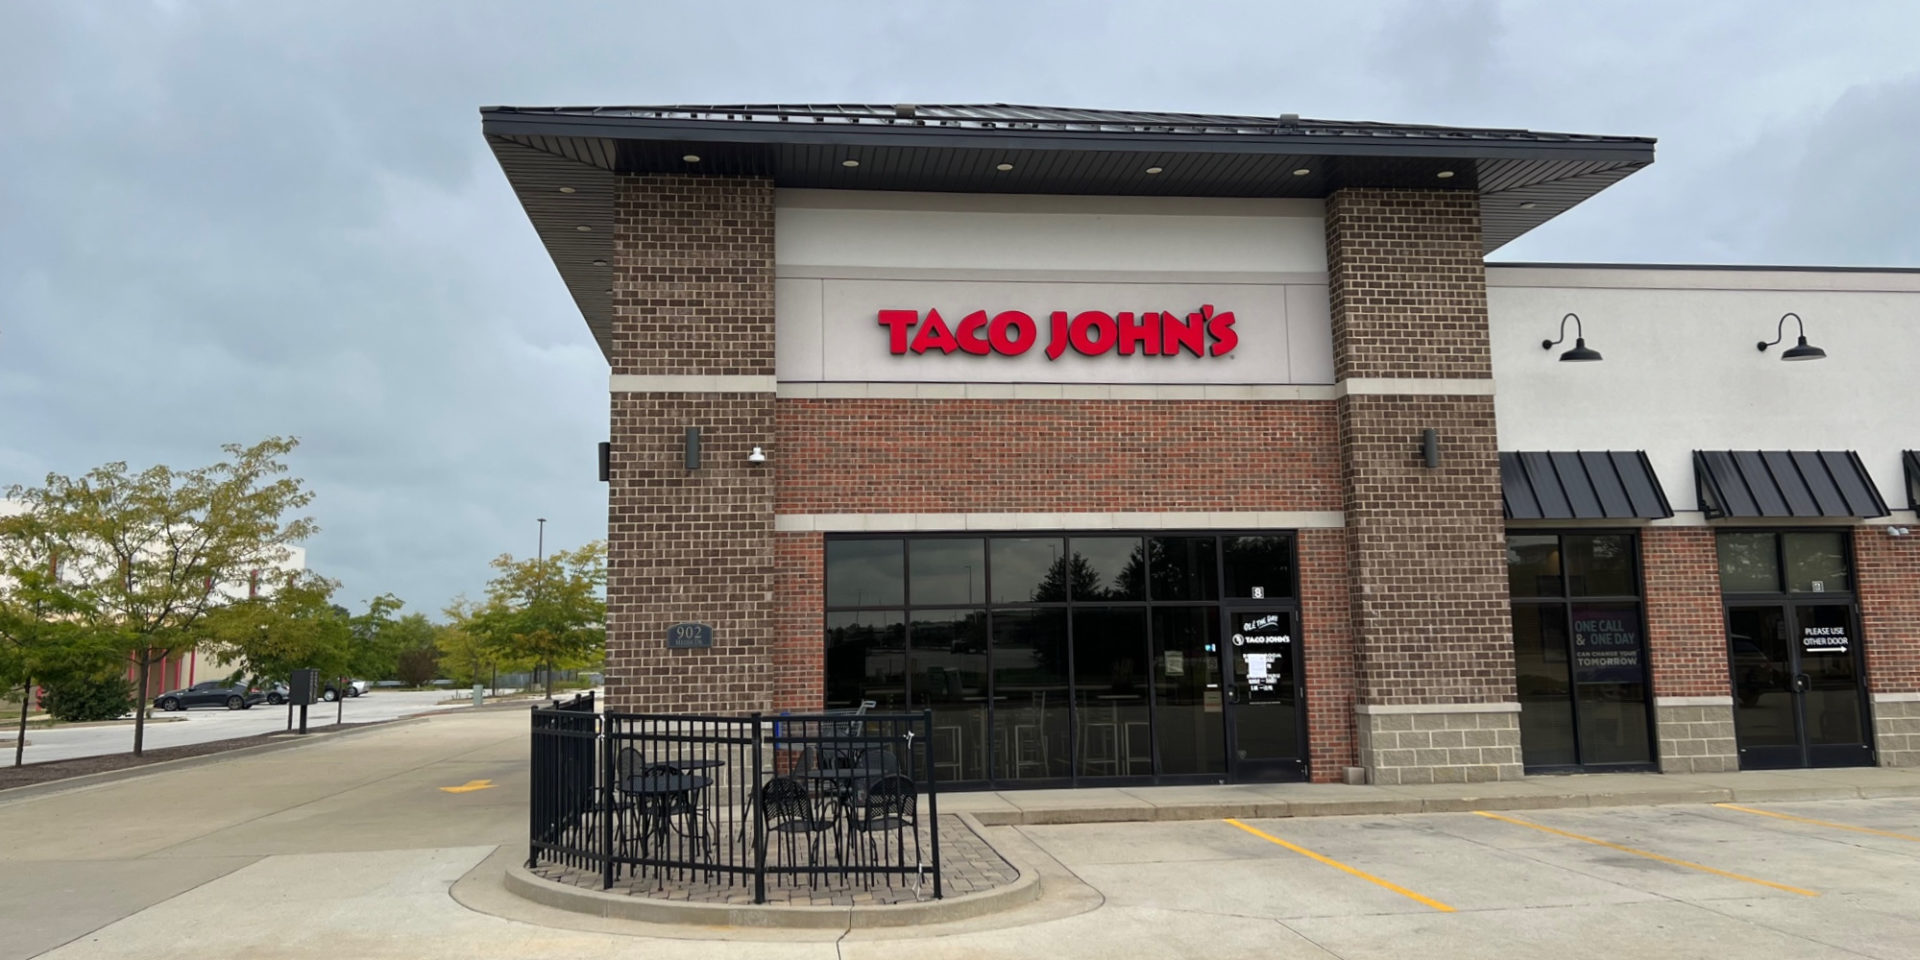 Exterior of a plaza fast food chain restaurant Taco John's in Champaign, which is now closed.